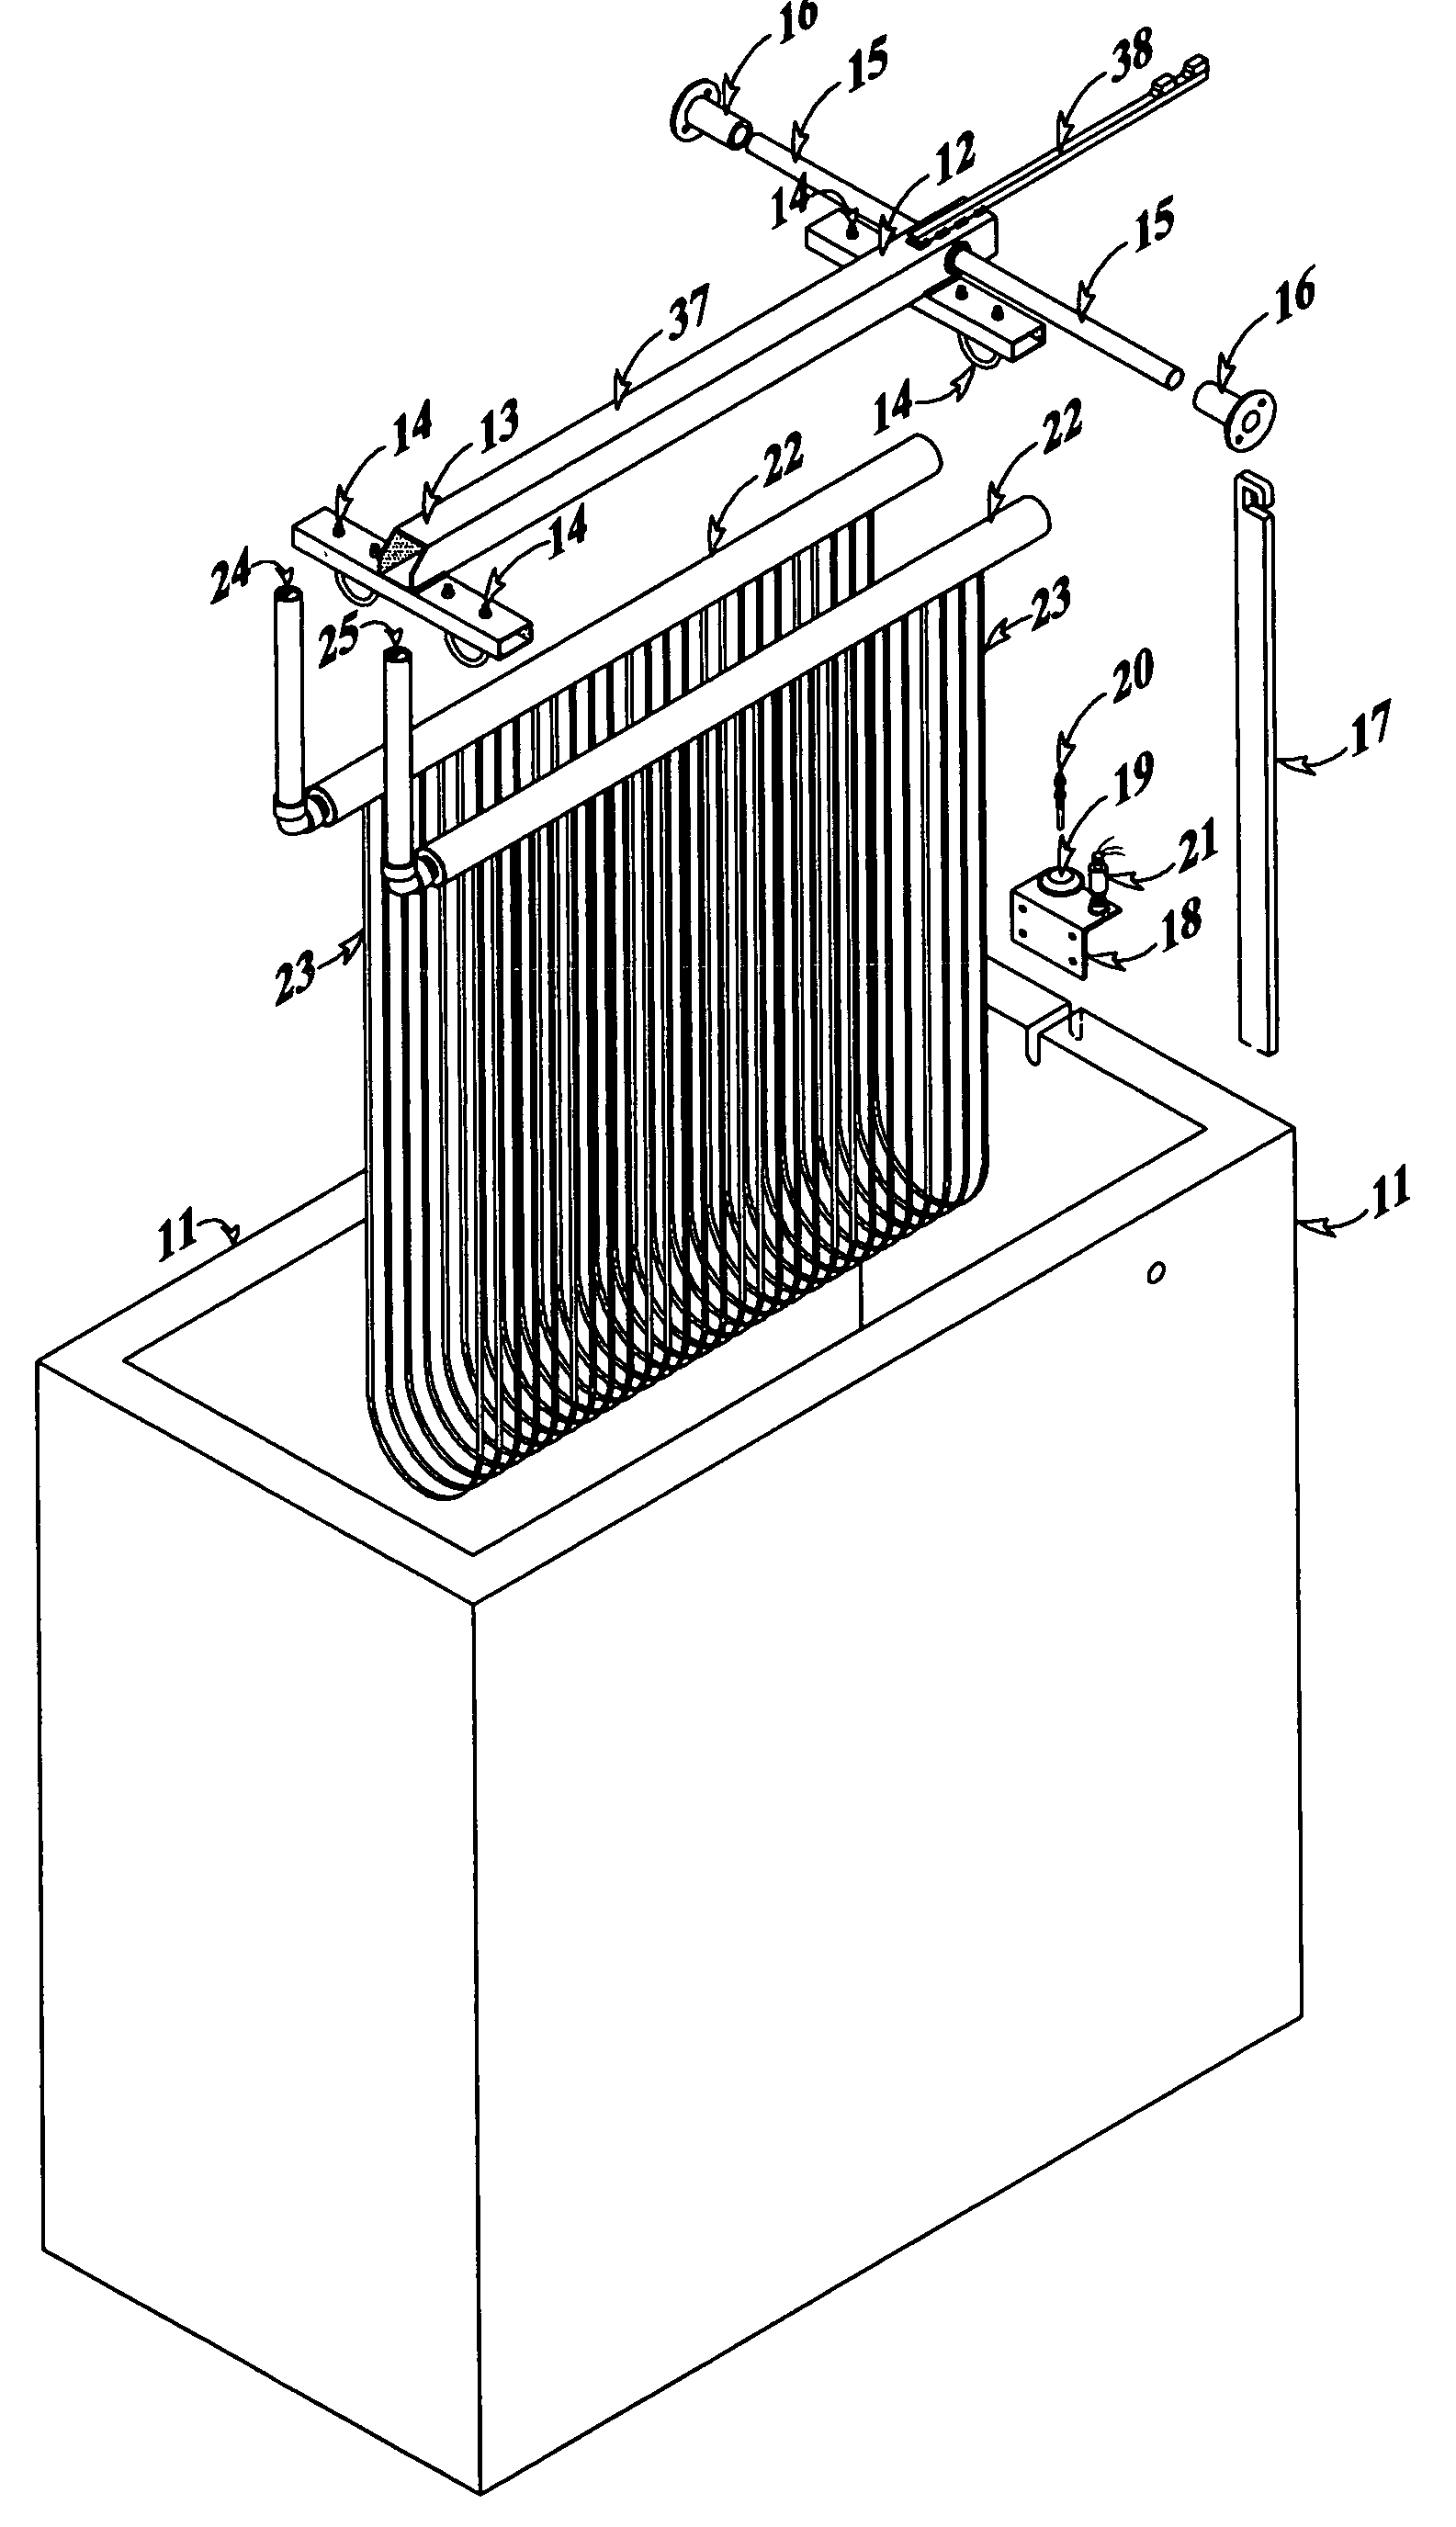 Automatic monitoring system for thermal energy storage plants